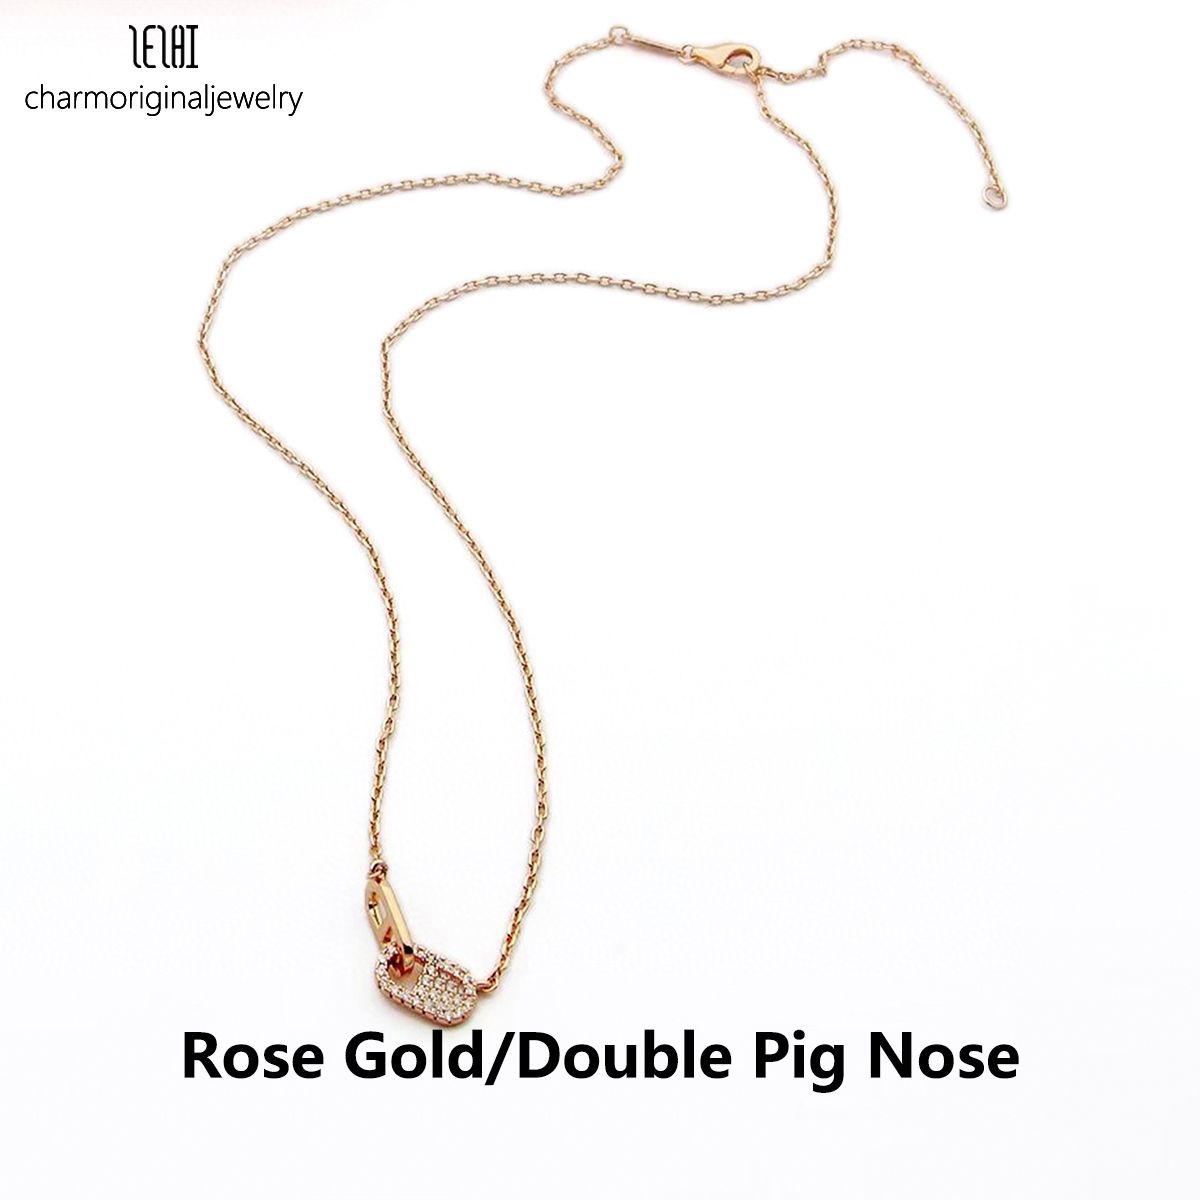 rose gold double pig nose